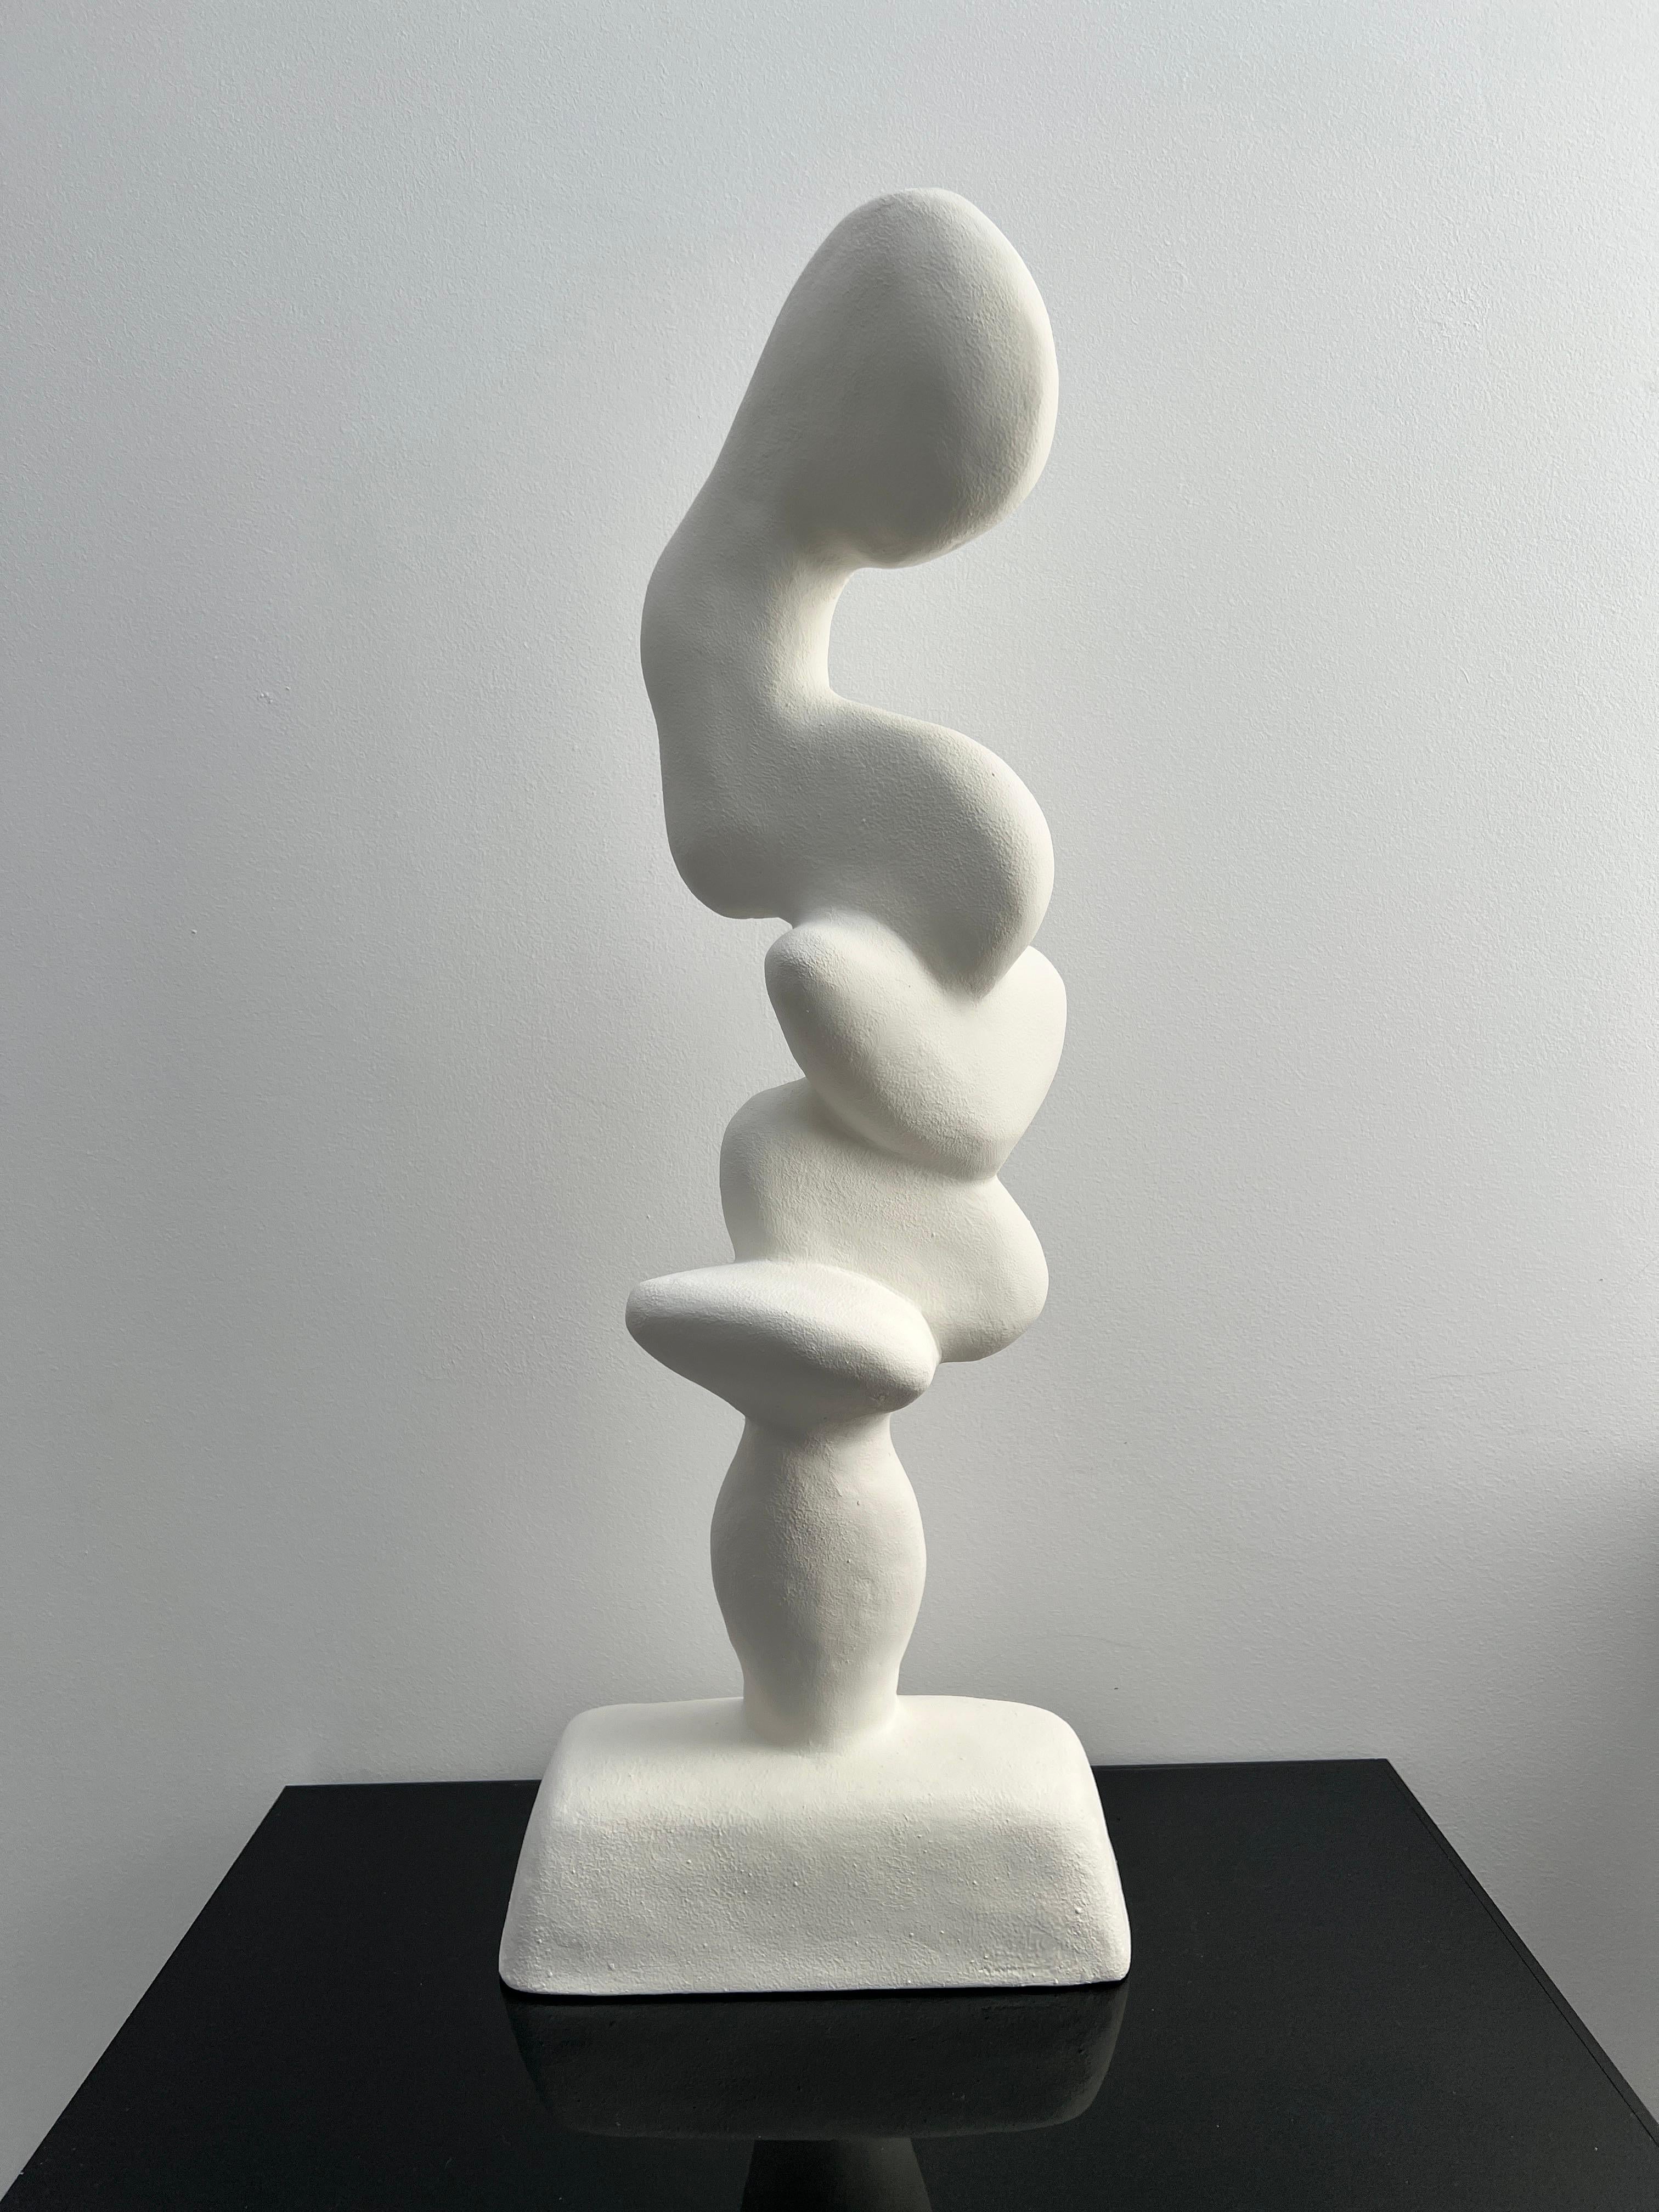 
A one of a kind sculpture of an abstract figure  in white,  handcrafted in full bodied gypsum reinforced with fibreglass matting and jute. The creative process takes multiple stages, from sculpting the original abstract form, followed by repetitive